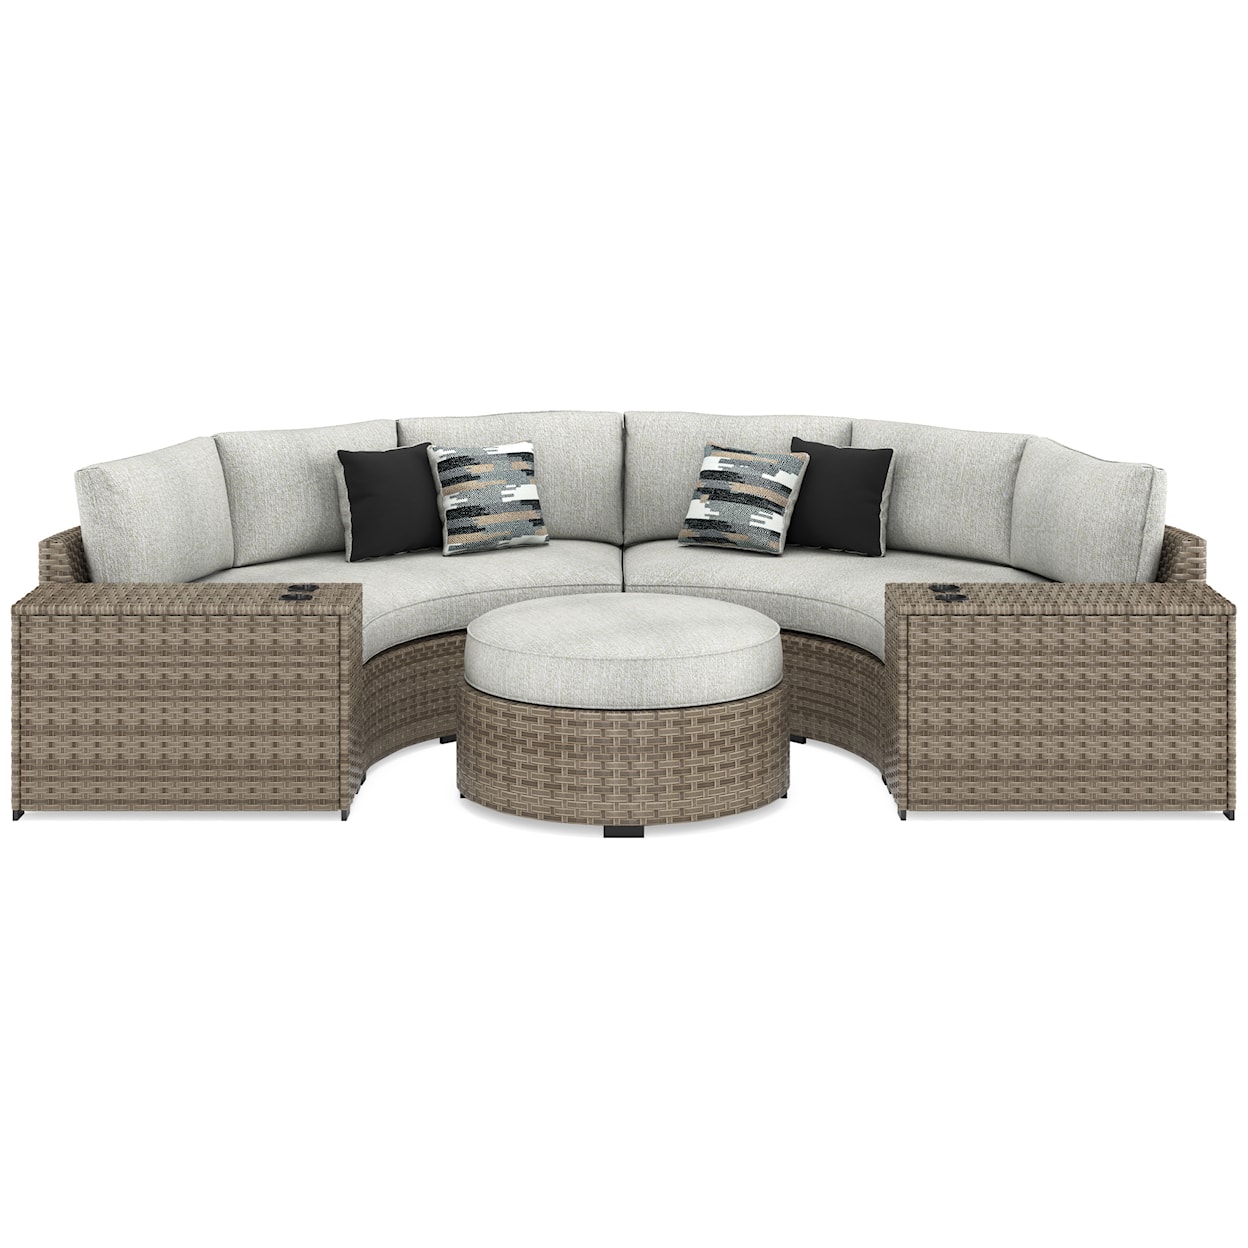 Benchcraft Calworth 4-Piece Outdoor Sectional